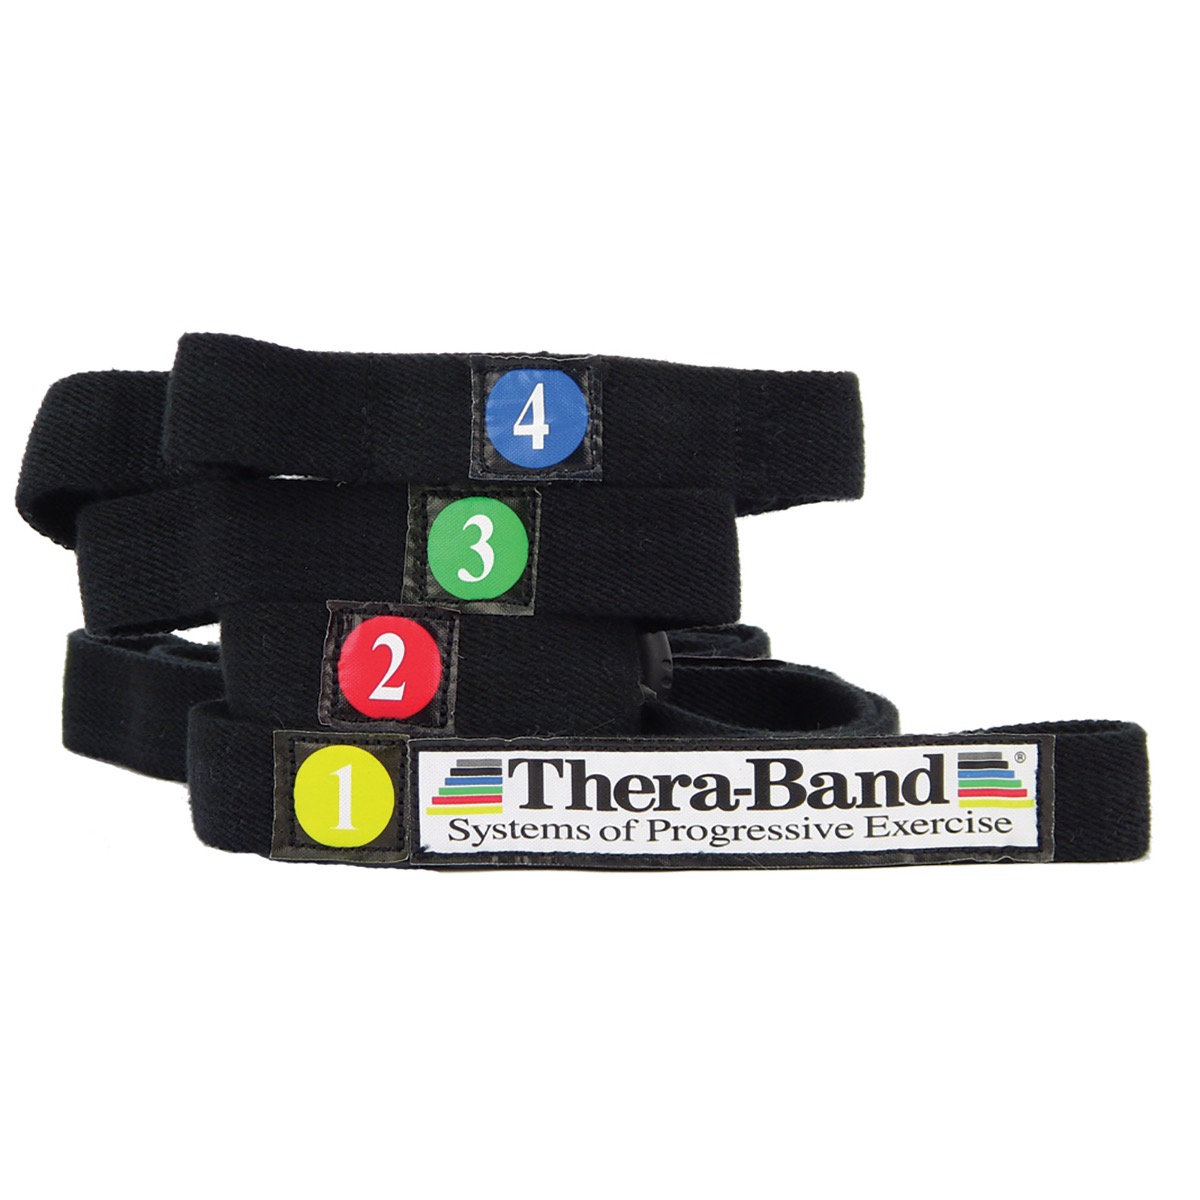 THERABAND Stretch Strap in use with legs